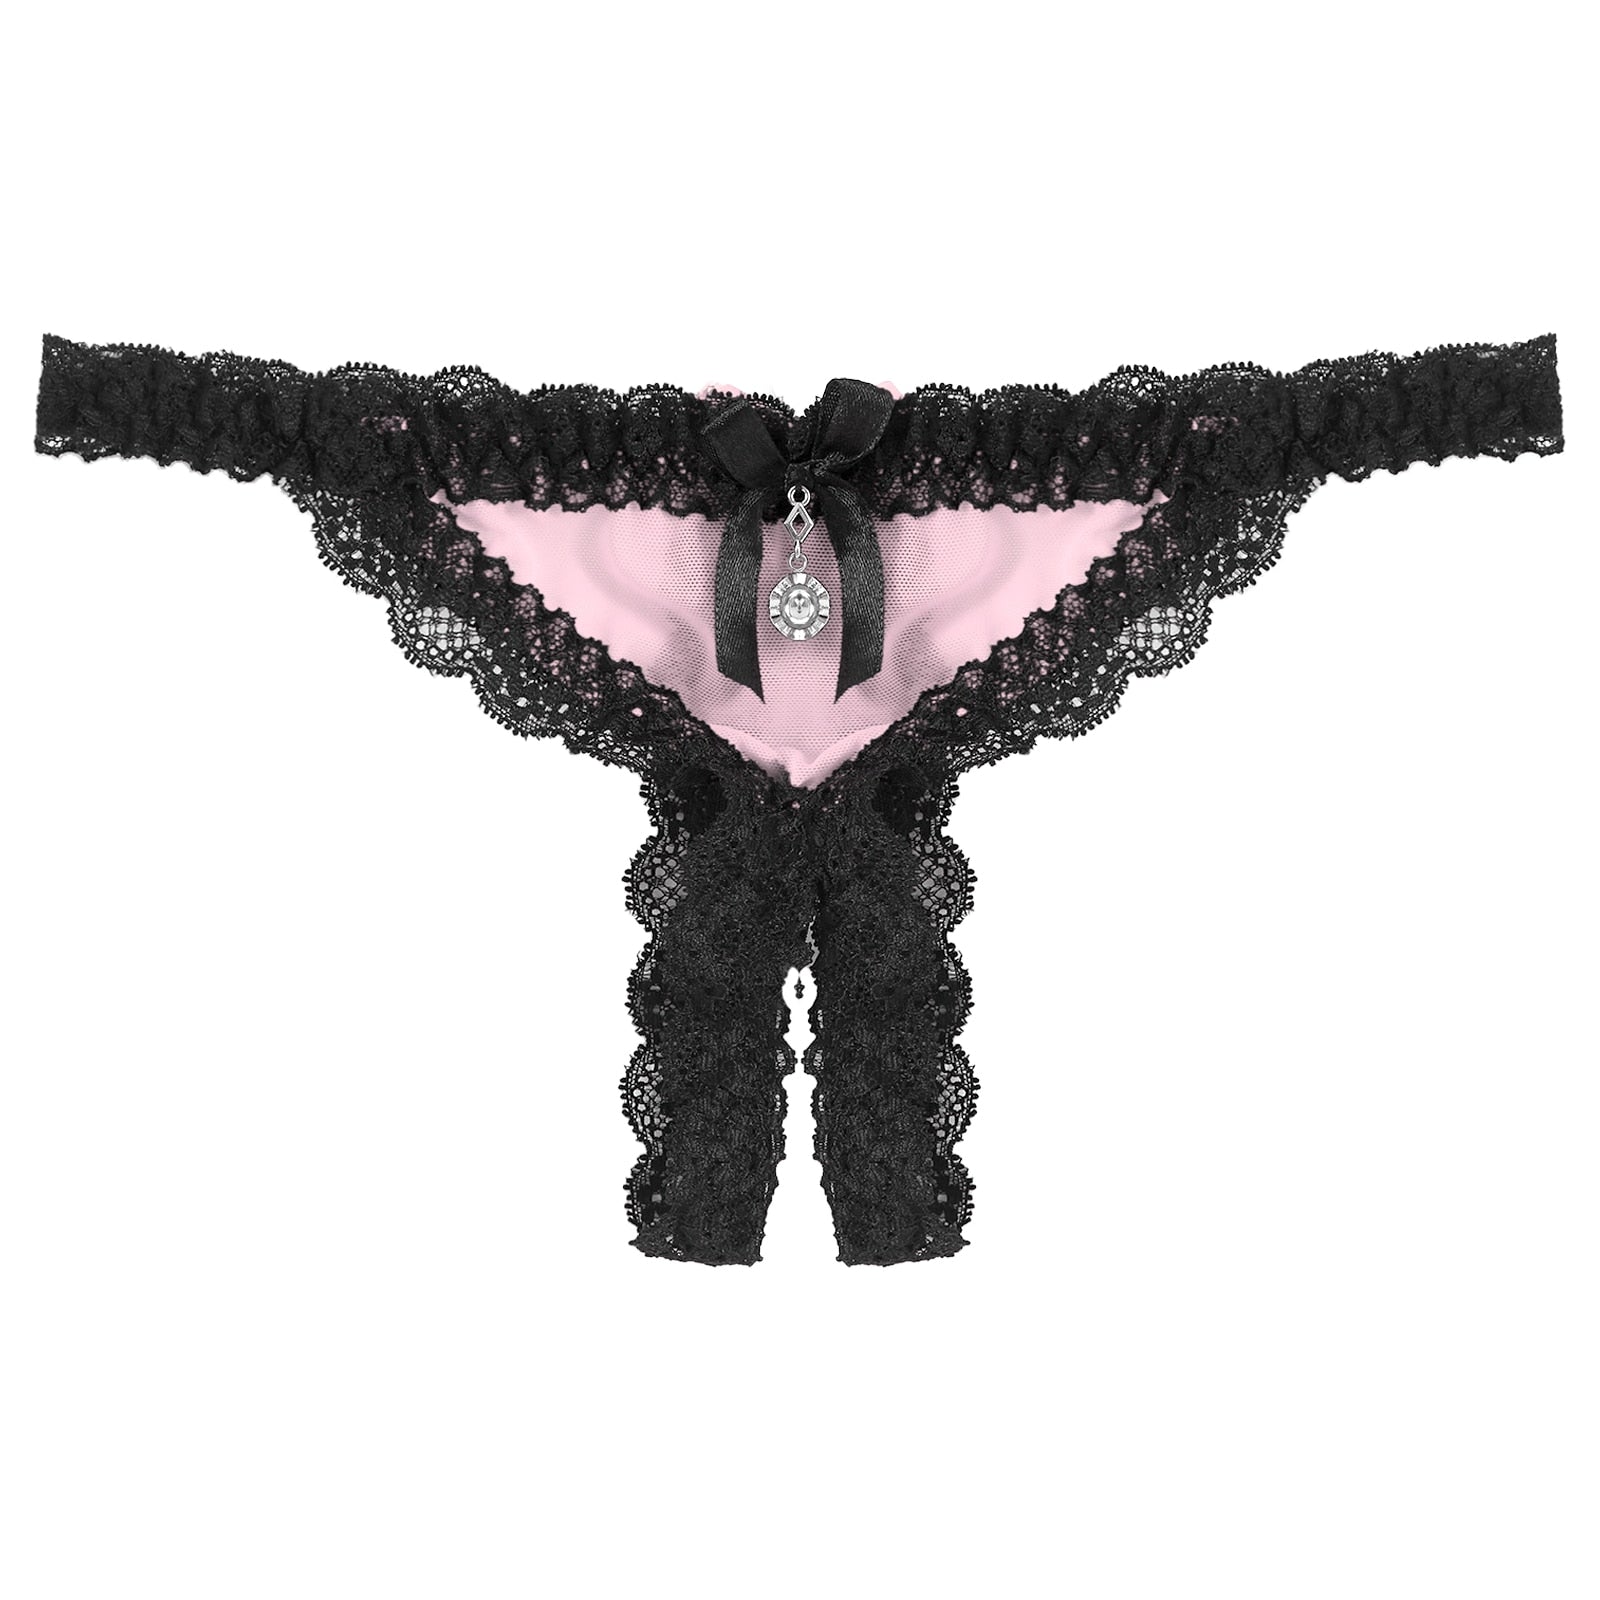 Sissy Veronica Crotchless Thong - Sissy Panty Shop